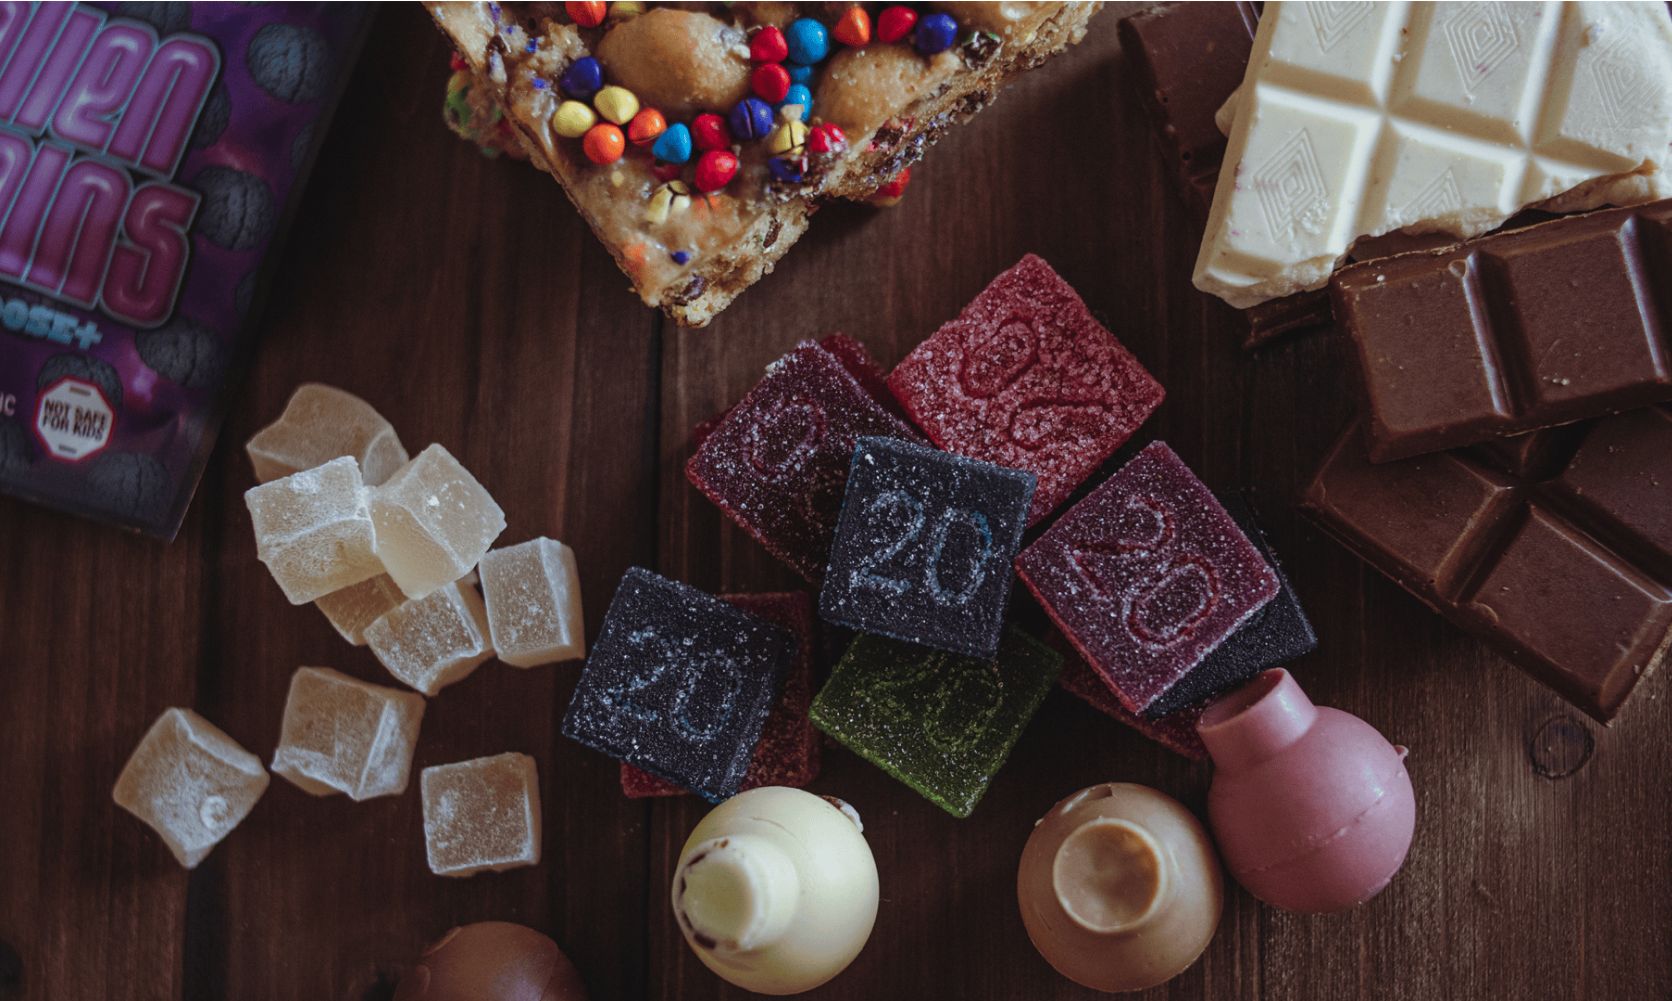 For comfort and ease of having your canna stash everywhere, switch to edibles today! The dispensary is your one-stop shop for cheap edibles online.